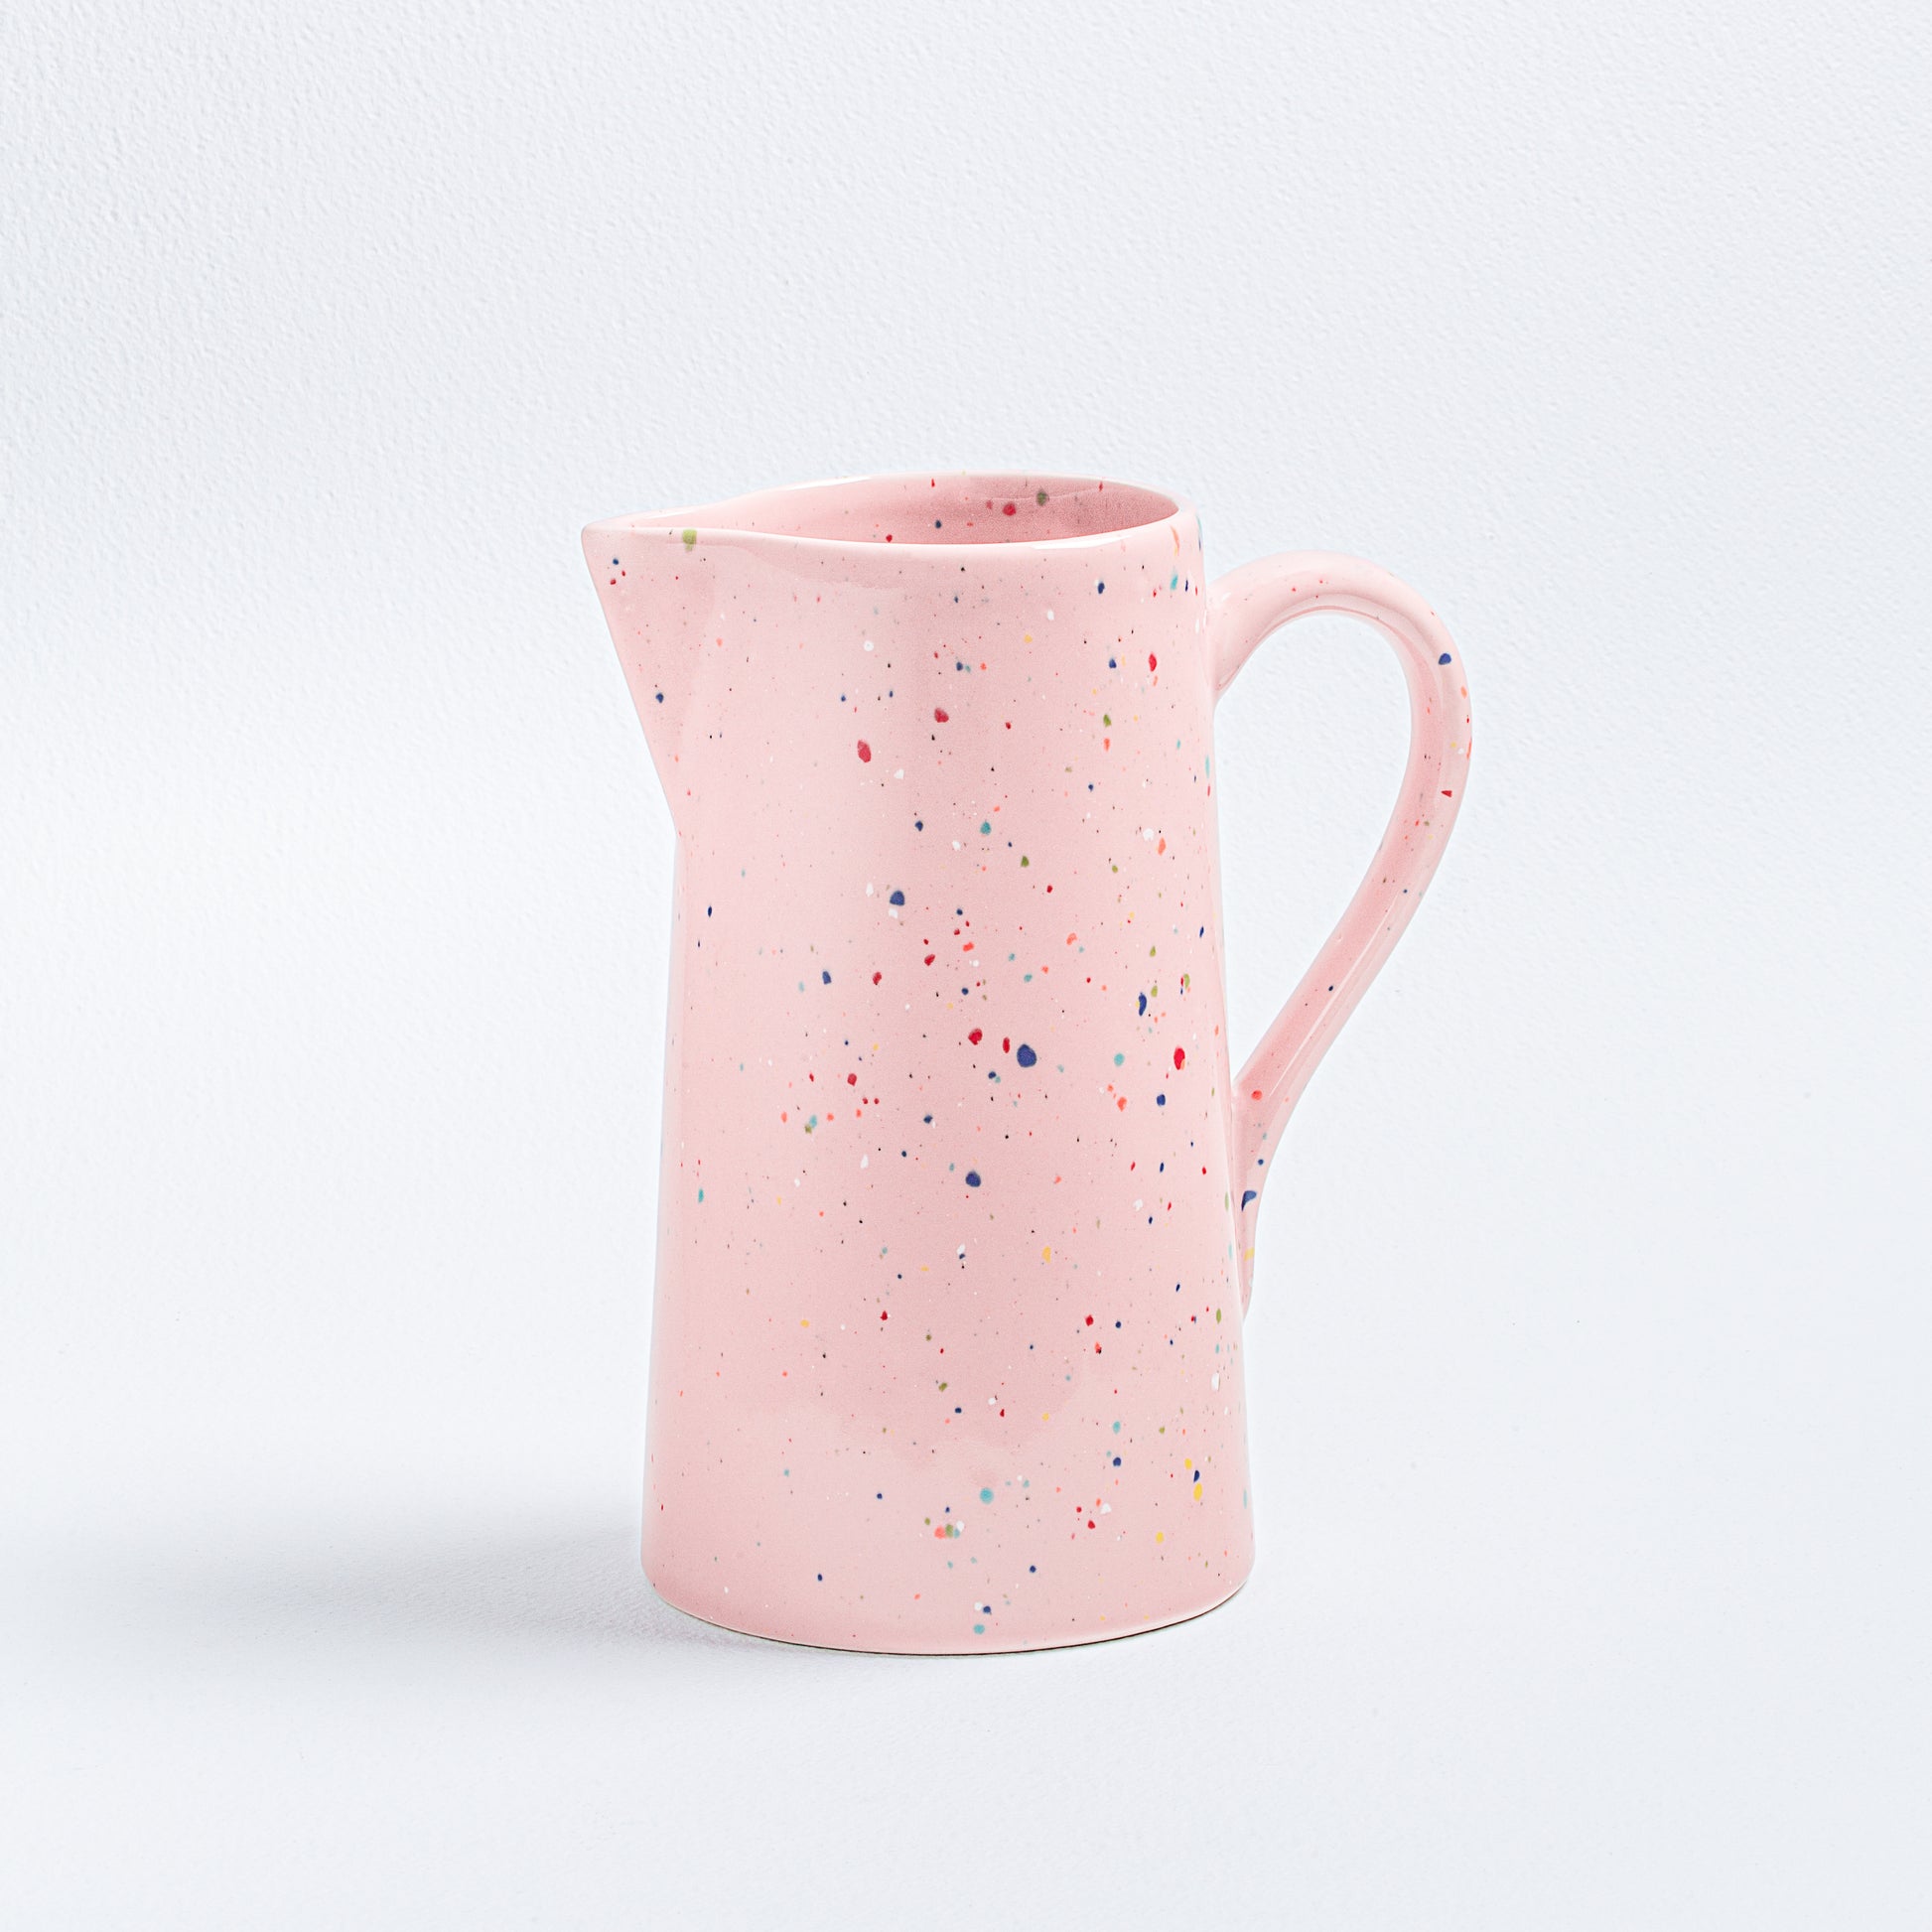 New Party Pitcher Pink 1.7L